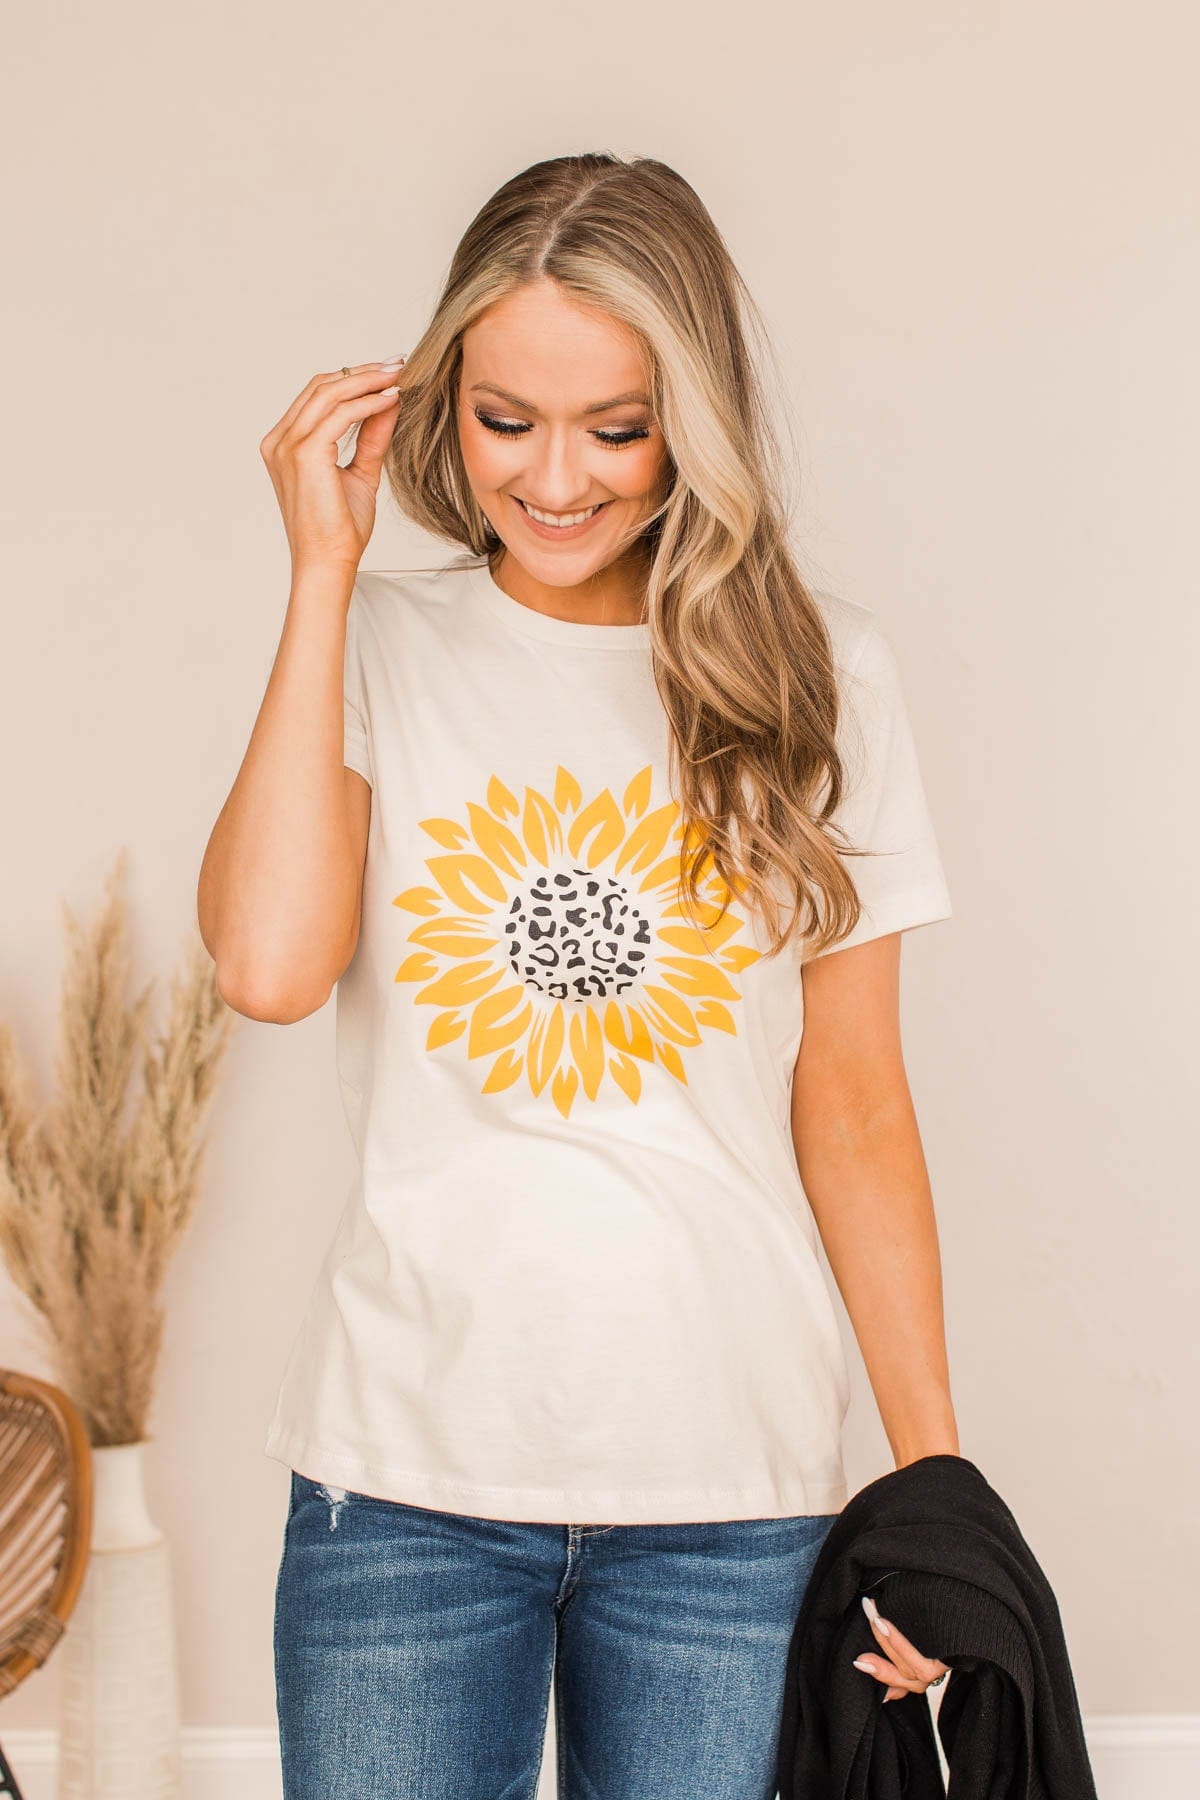 Bright Sunshiny Day Printed Top- White